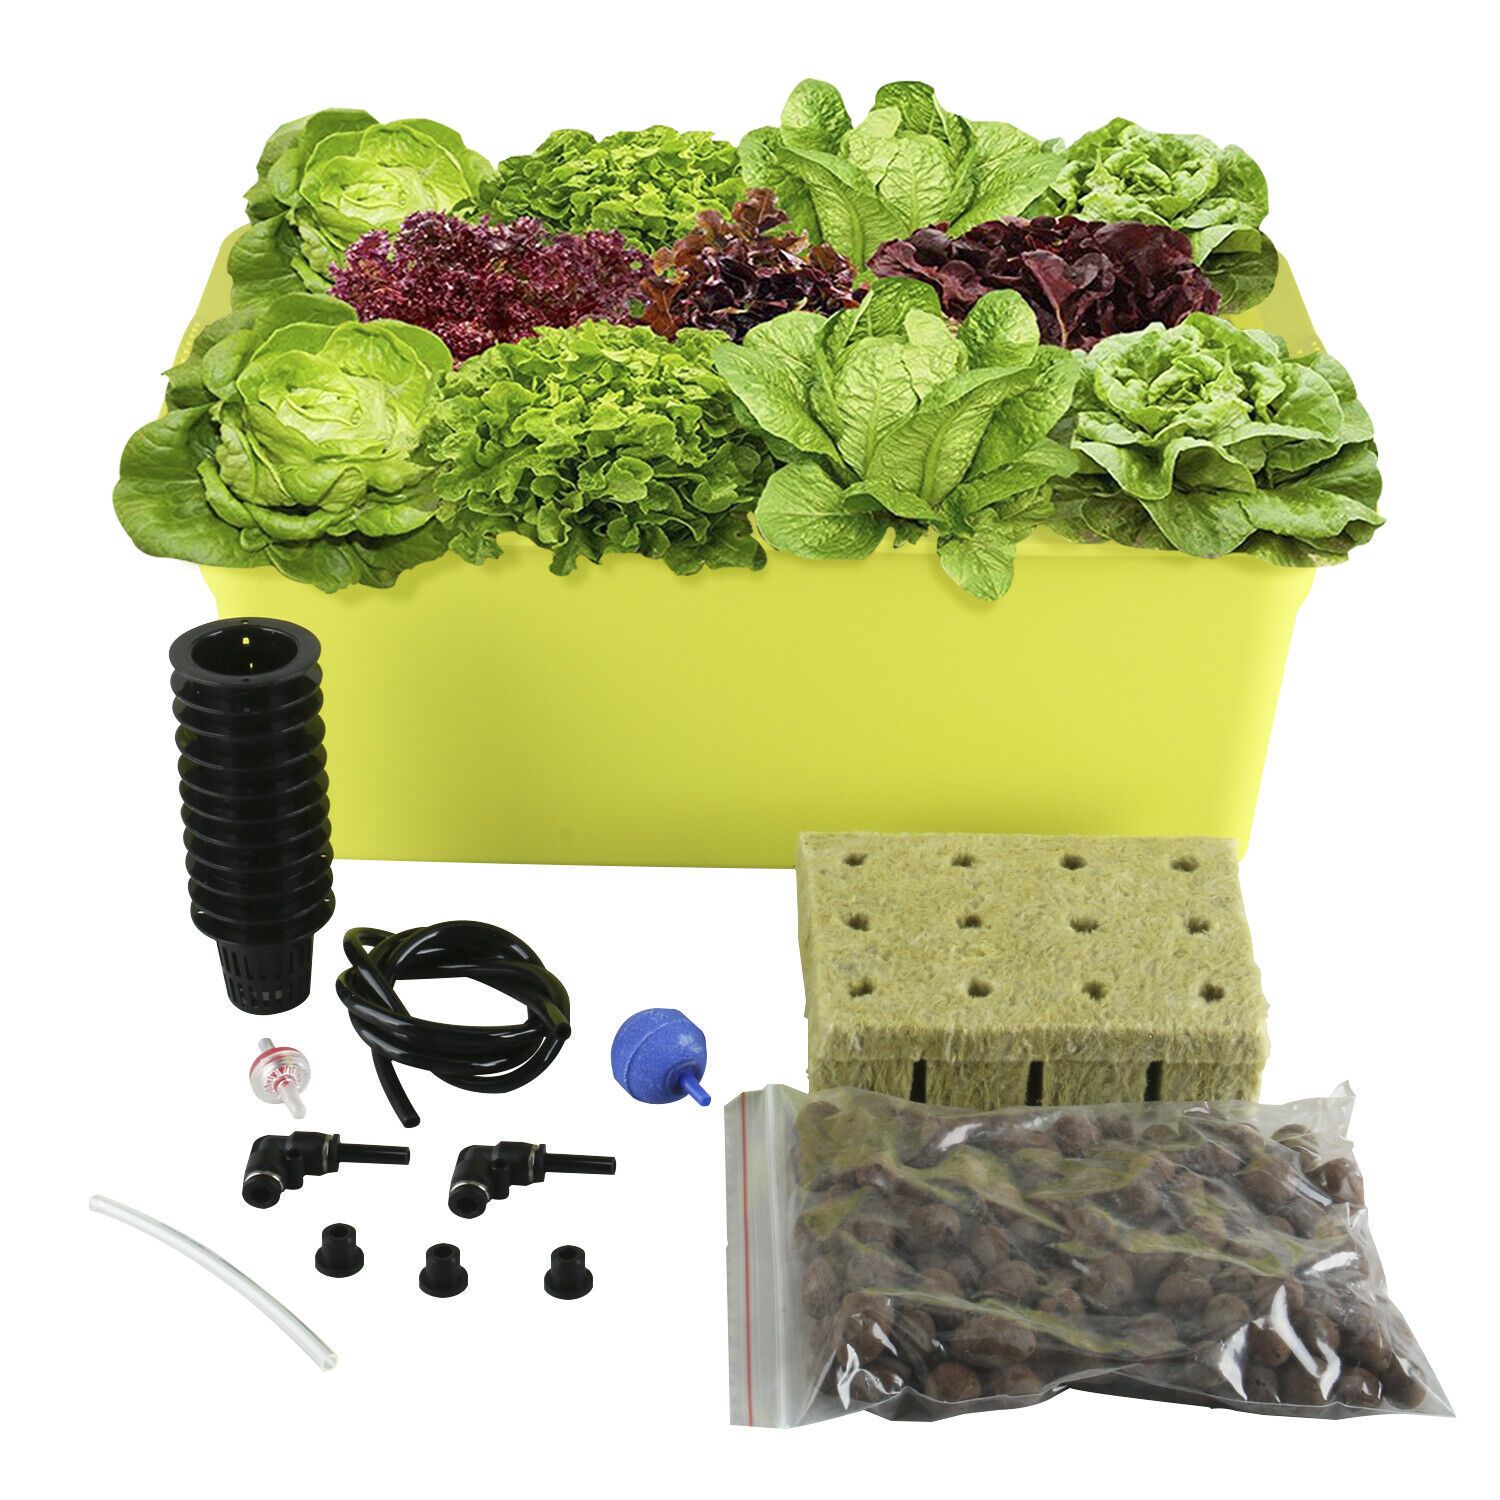 11 Holes Plant Site Hydroponic System Grow Kit,Best Indoor Herb Garden W/ Manual